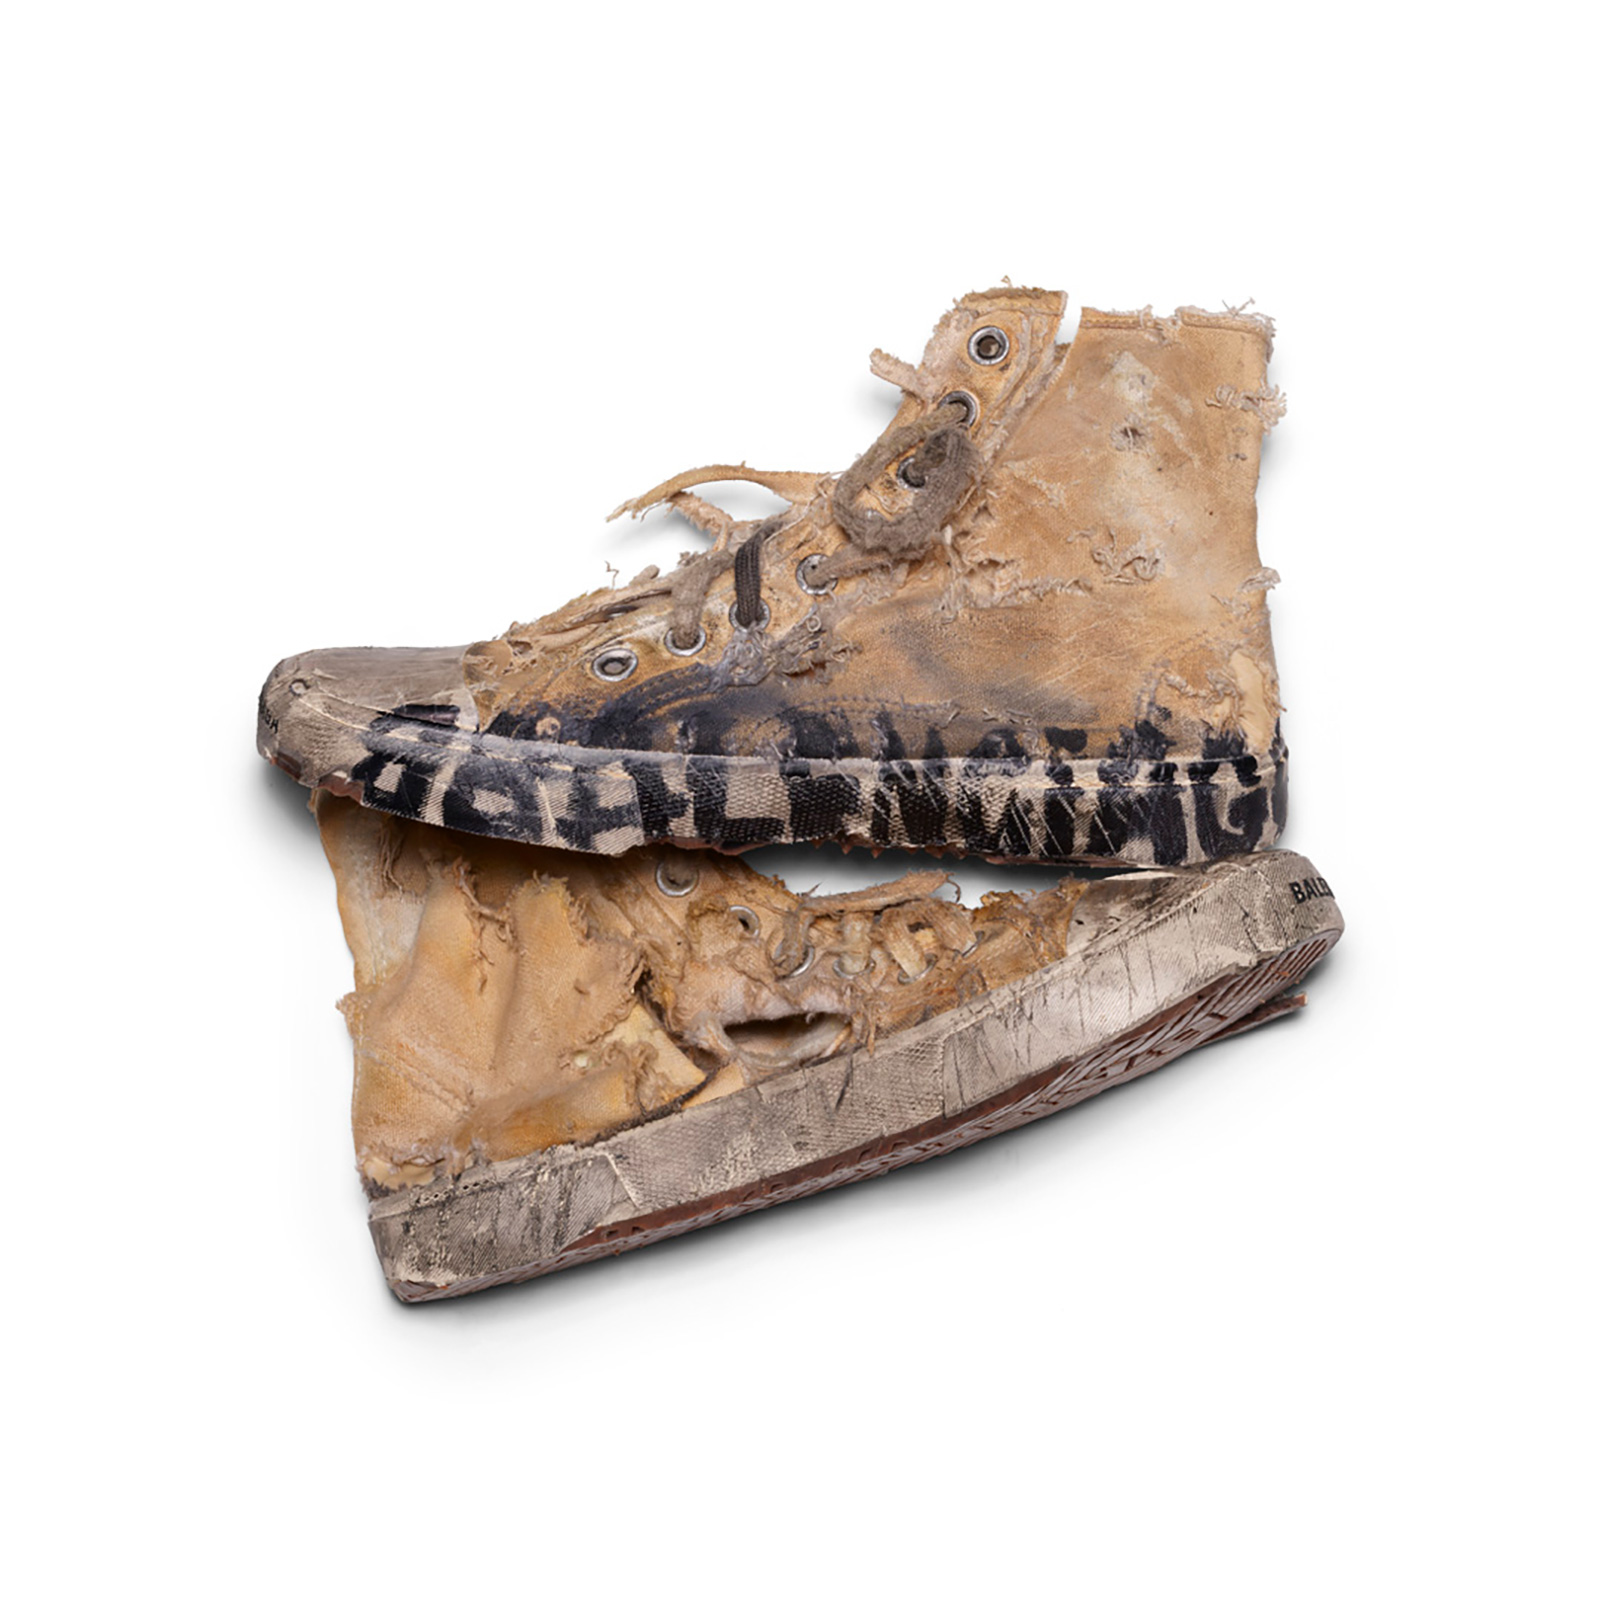 selling destroyed sneakers for $1,850 - CNN Style